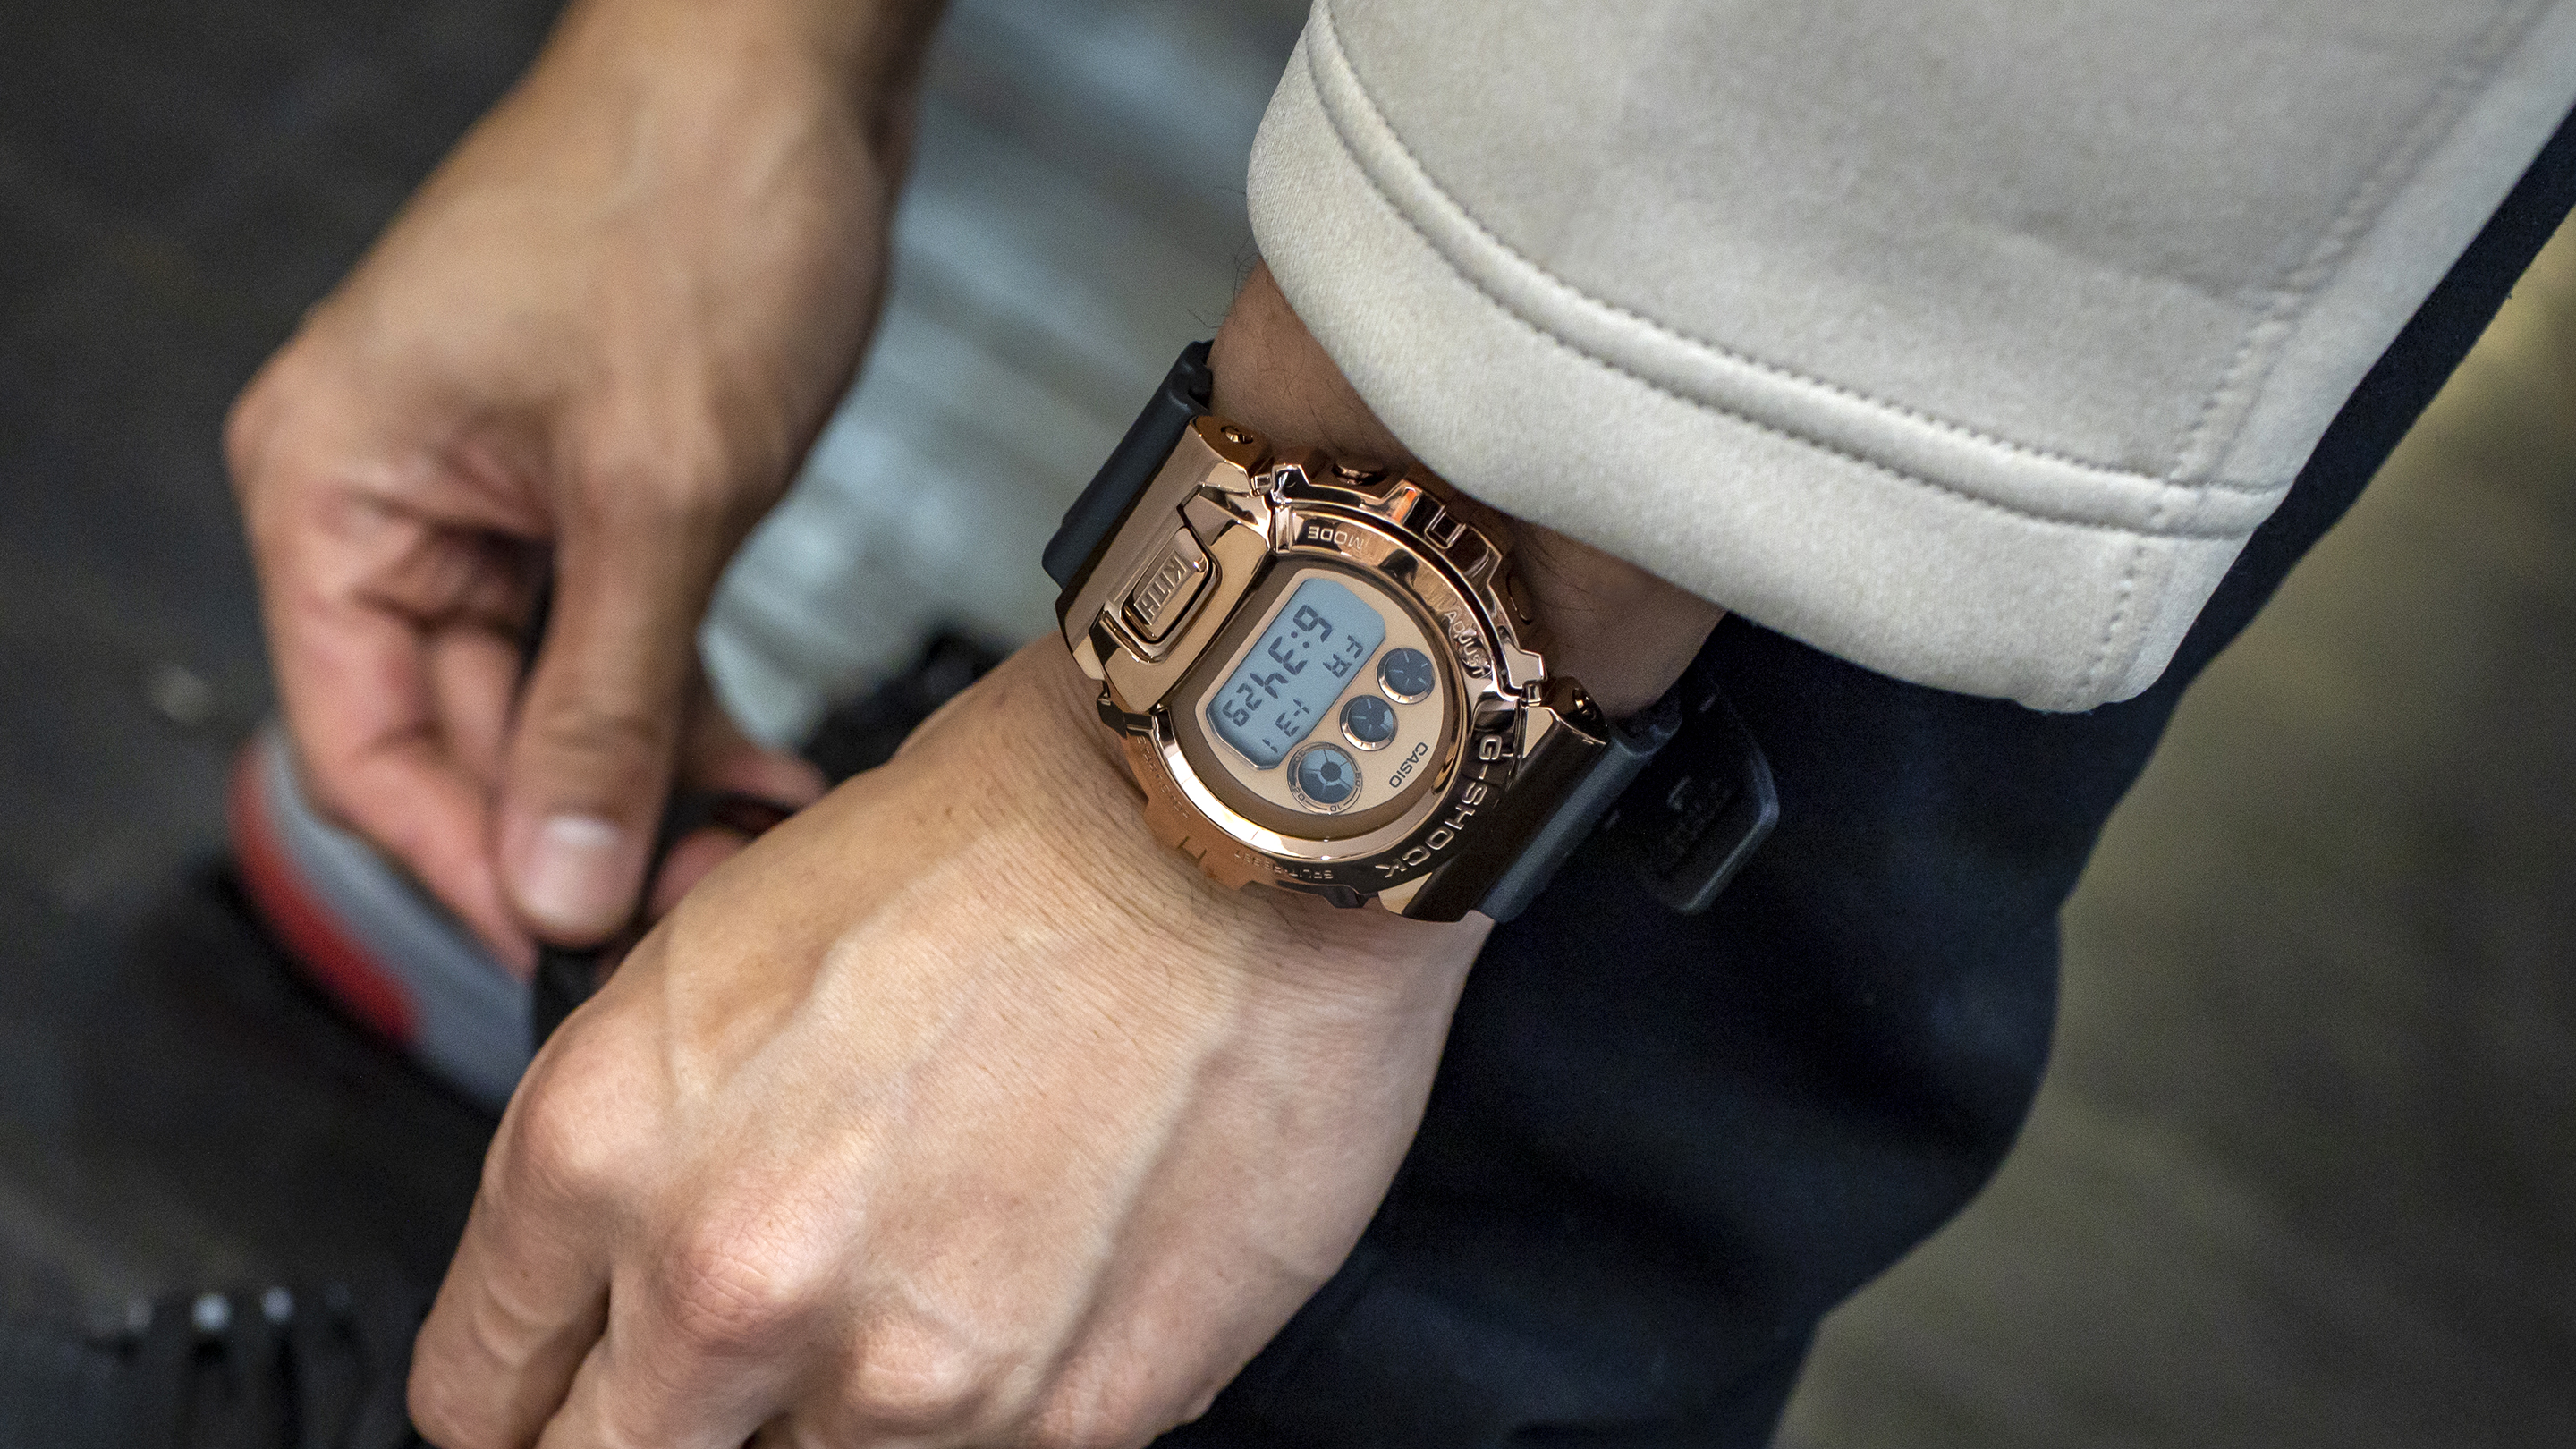 Introducing: The KITH x G-Shock GM6900 Rose Gold - Hodinkee